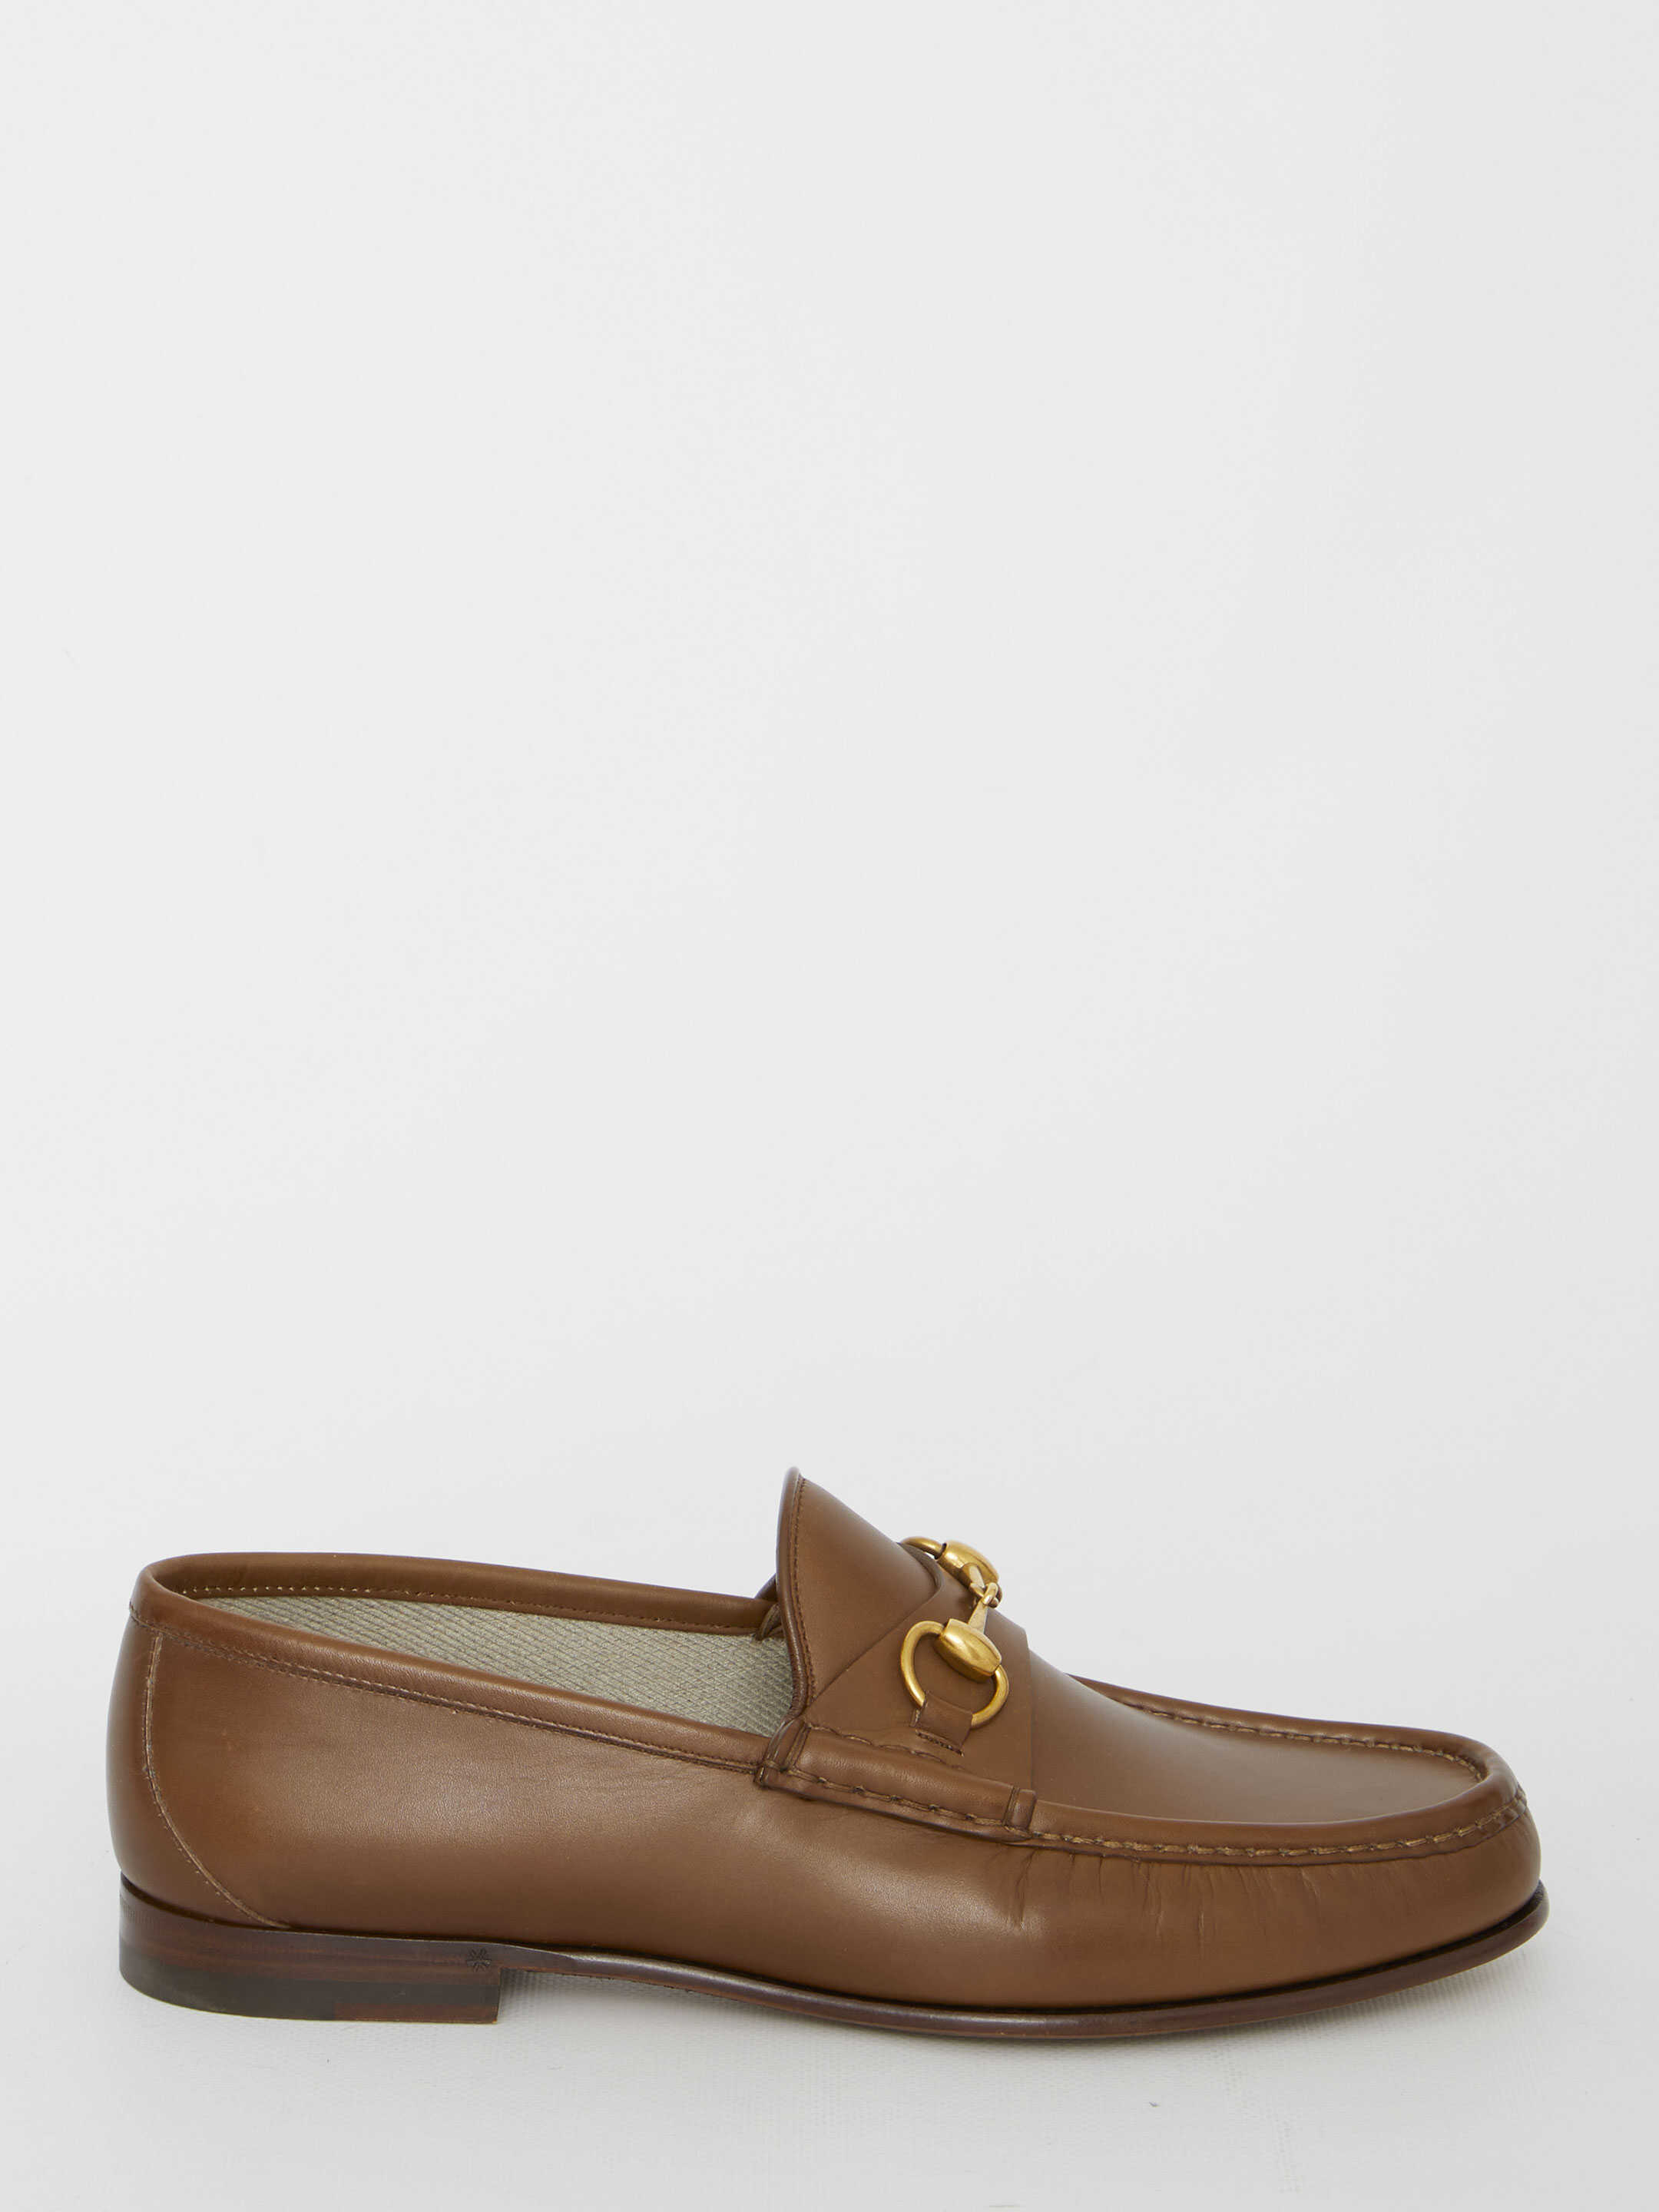 Gucci 1953 Horsebit Loafers BROWN